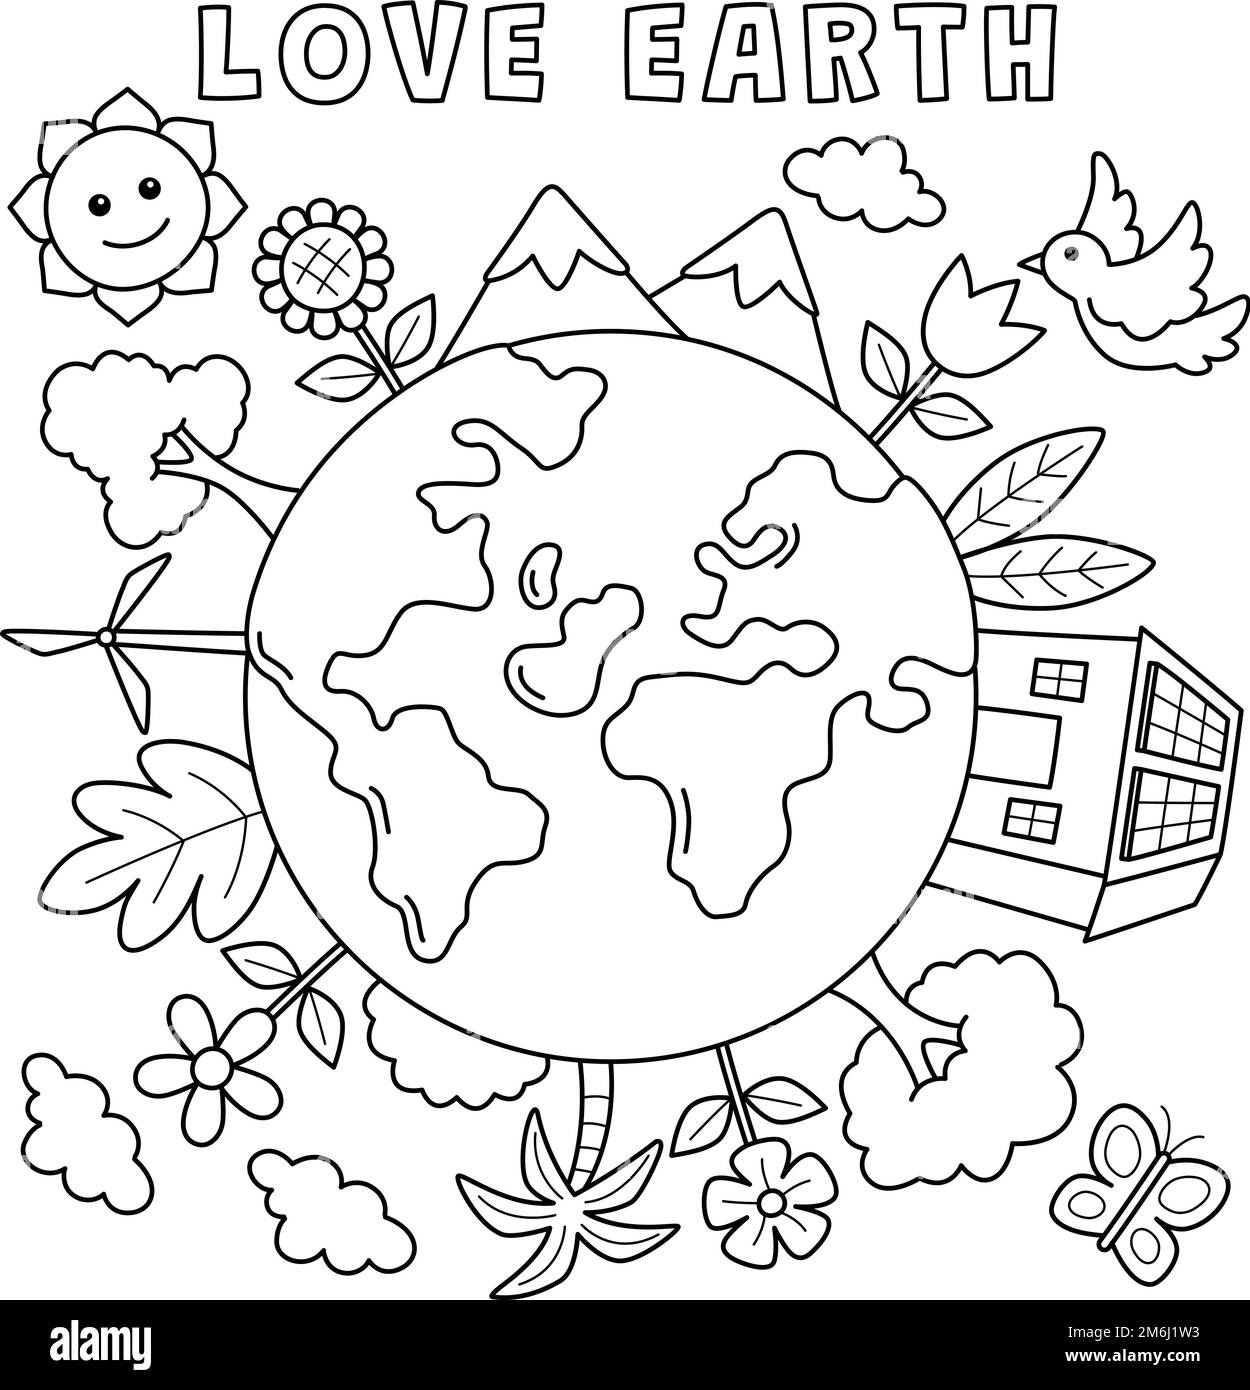 Love Earth Coloring Page for Kids Stock Vector